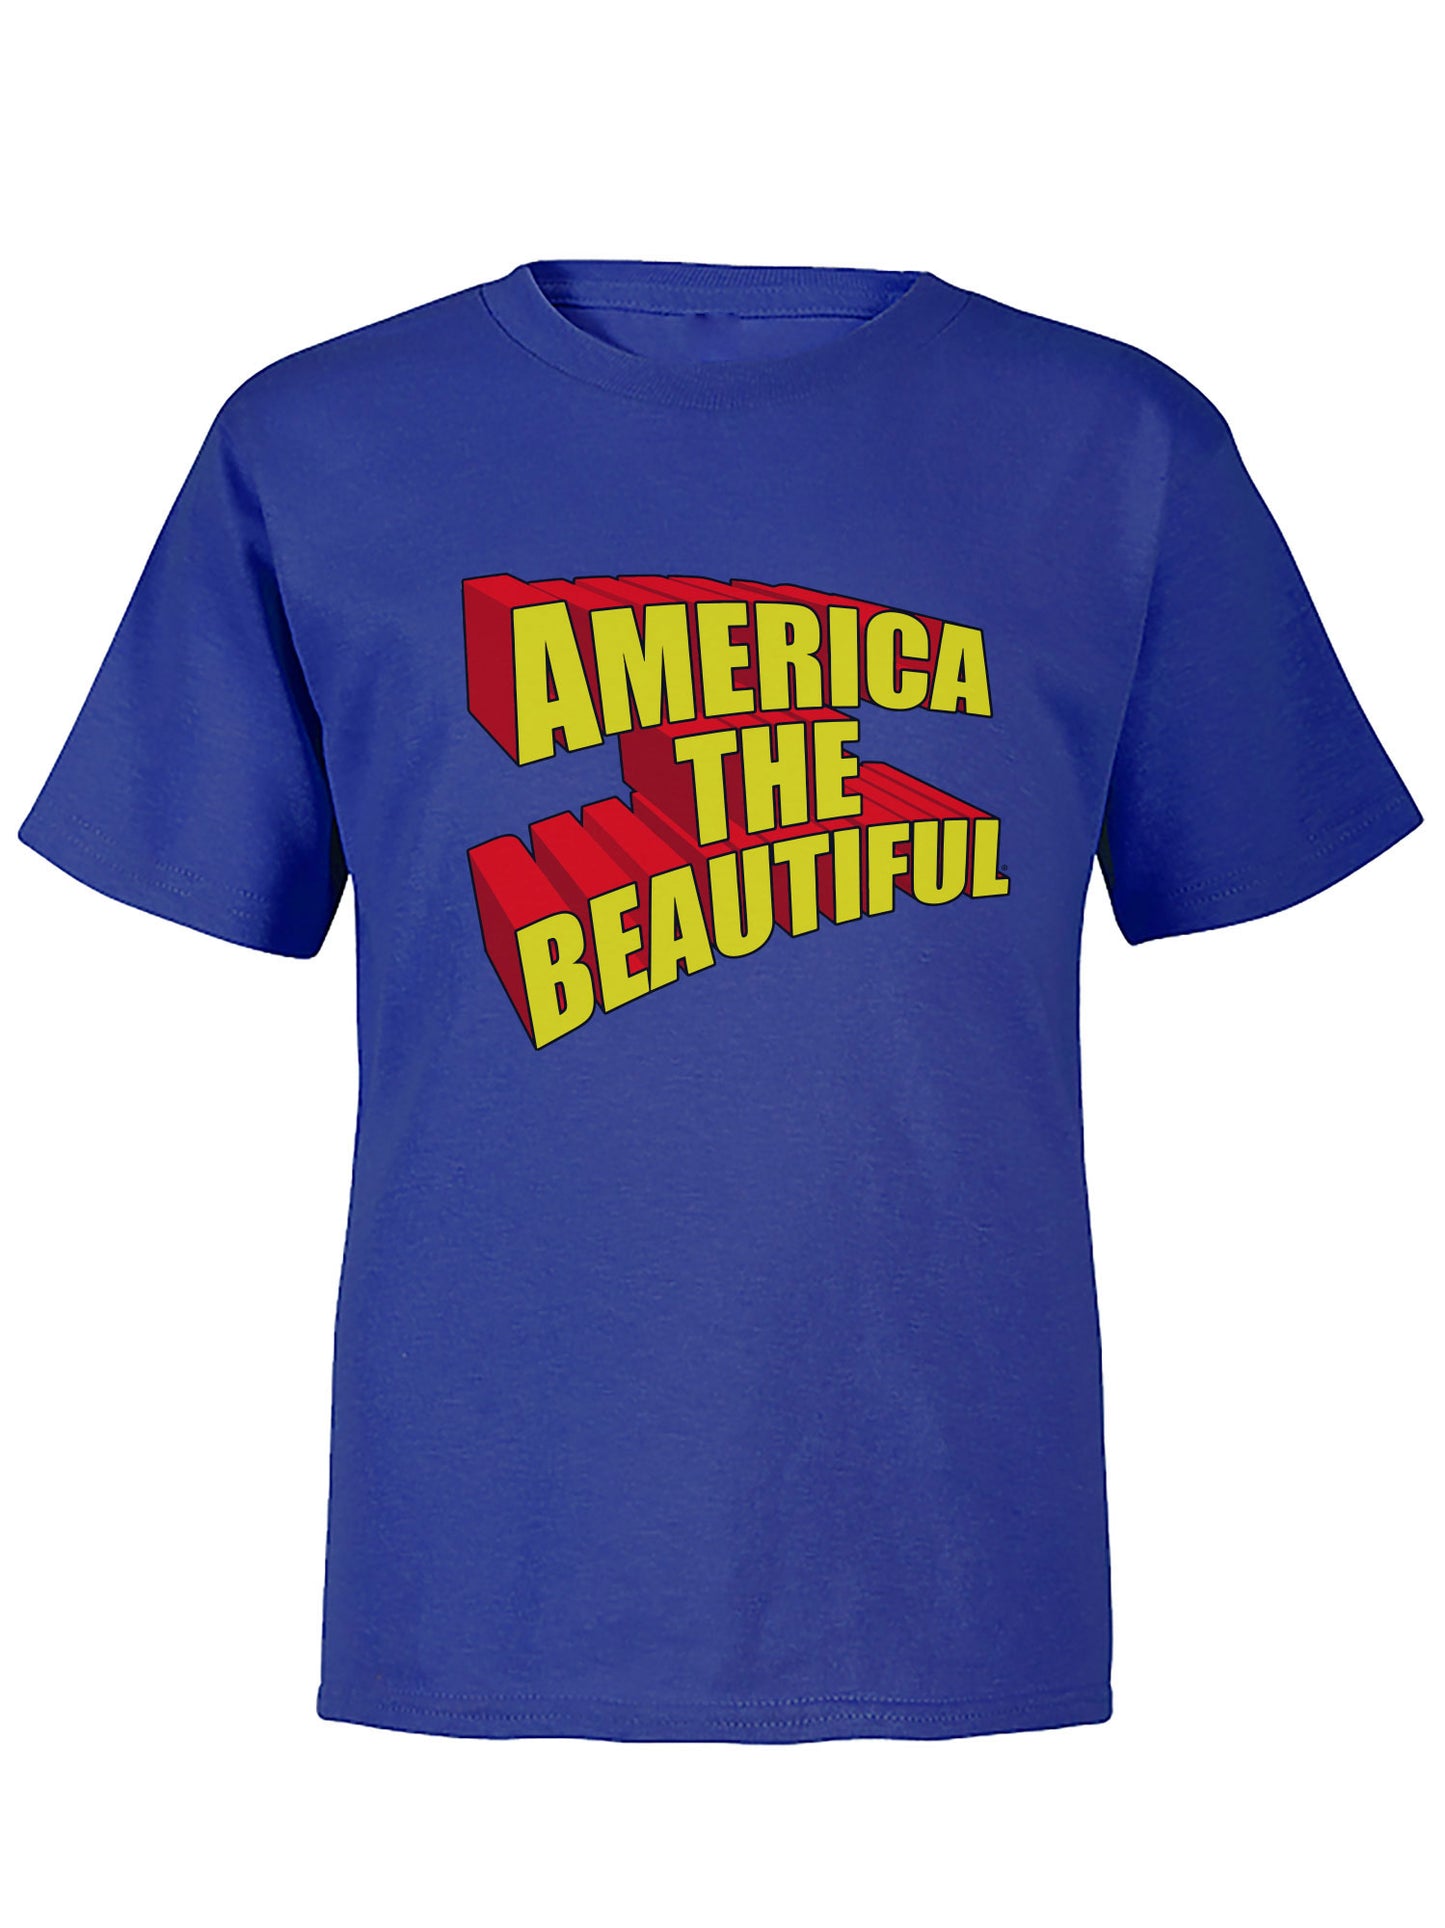 American Superhero Toddler Graphic T-Shirt by America The Beautiful